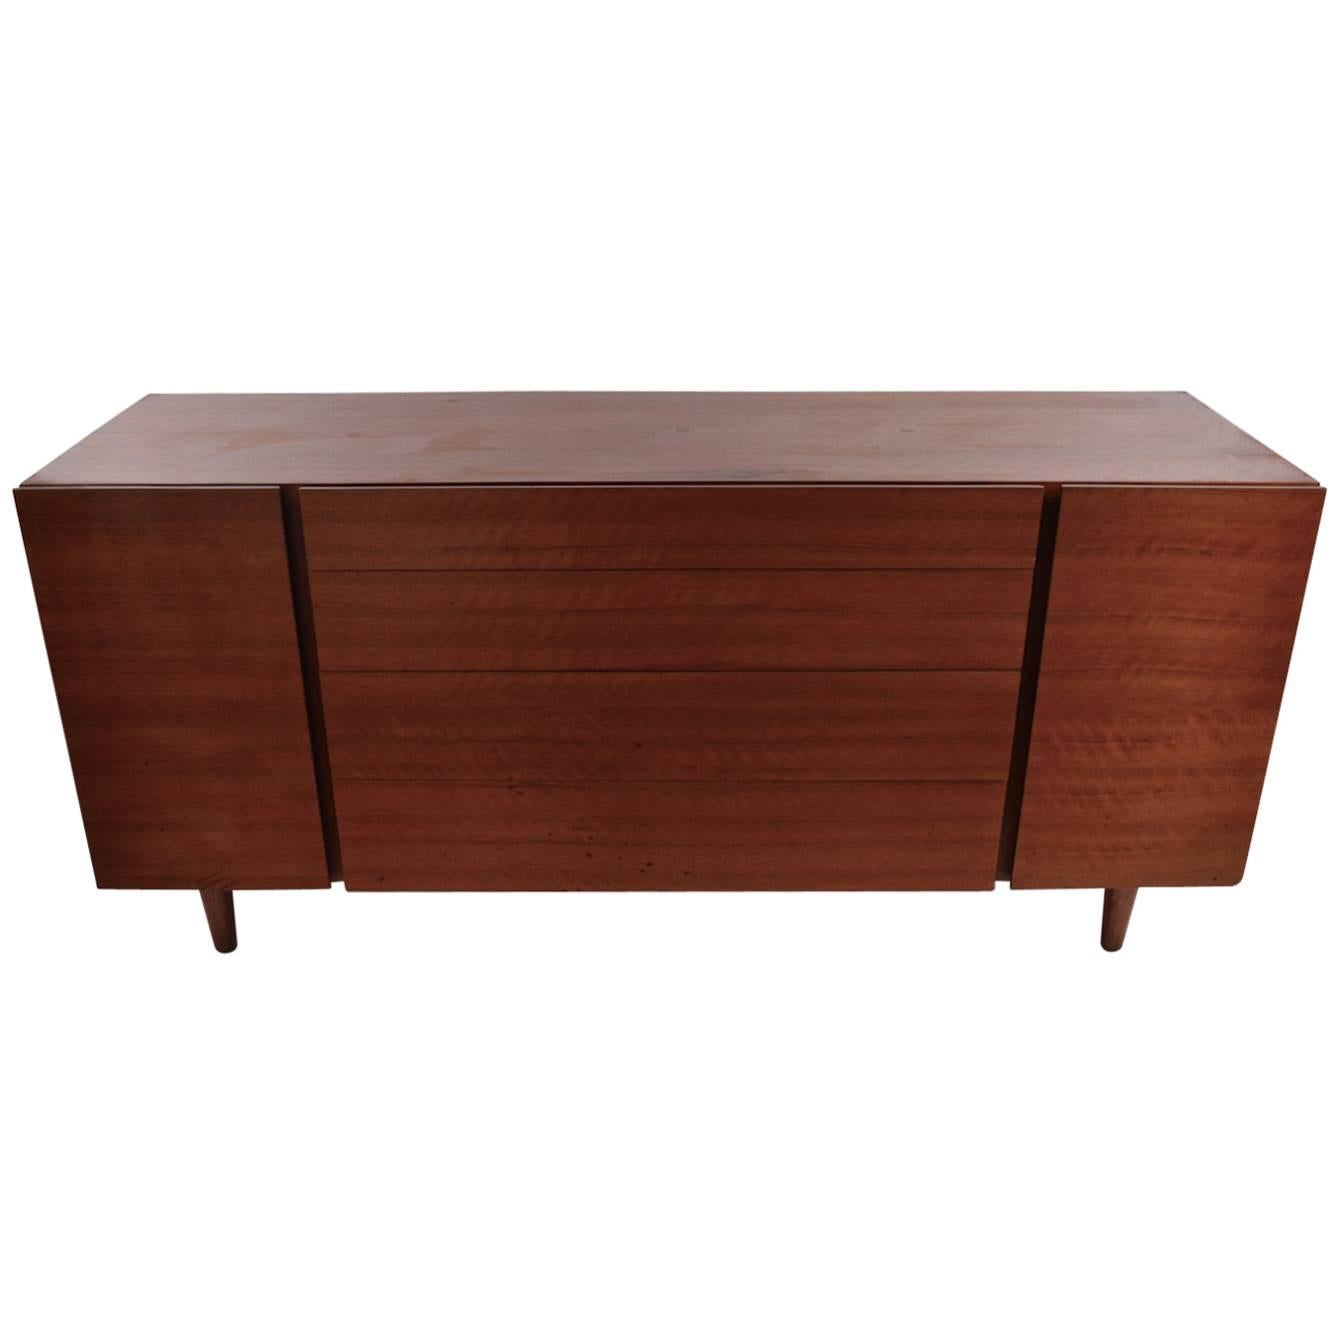 Singer and Sons Sideboard by Bertha Schaefer